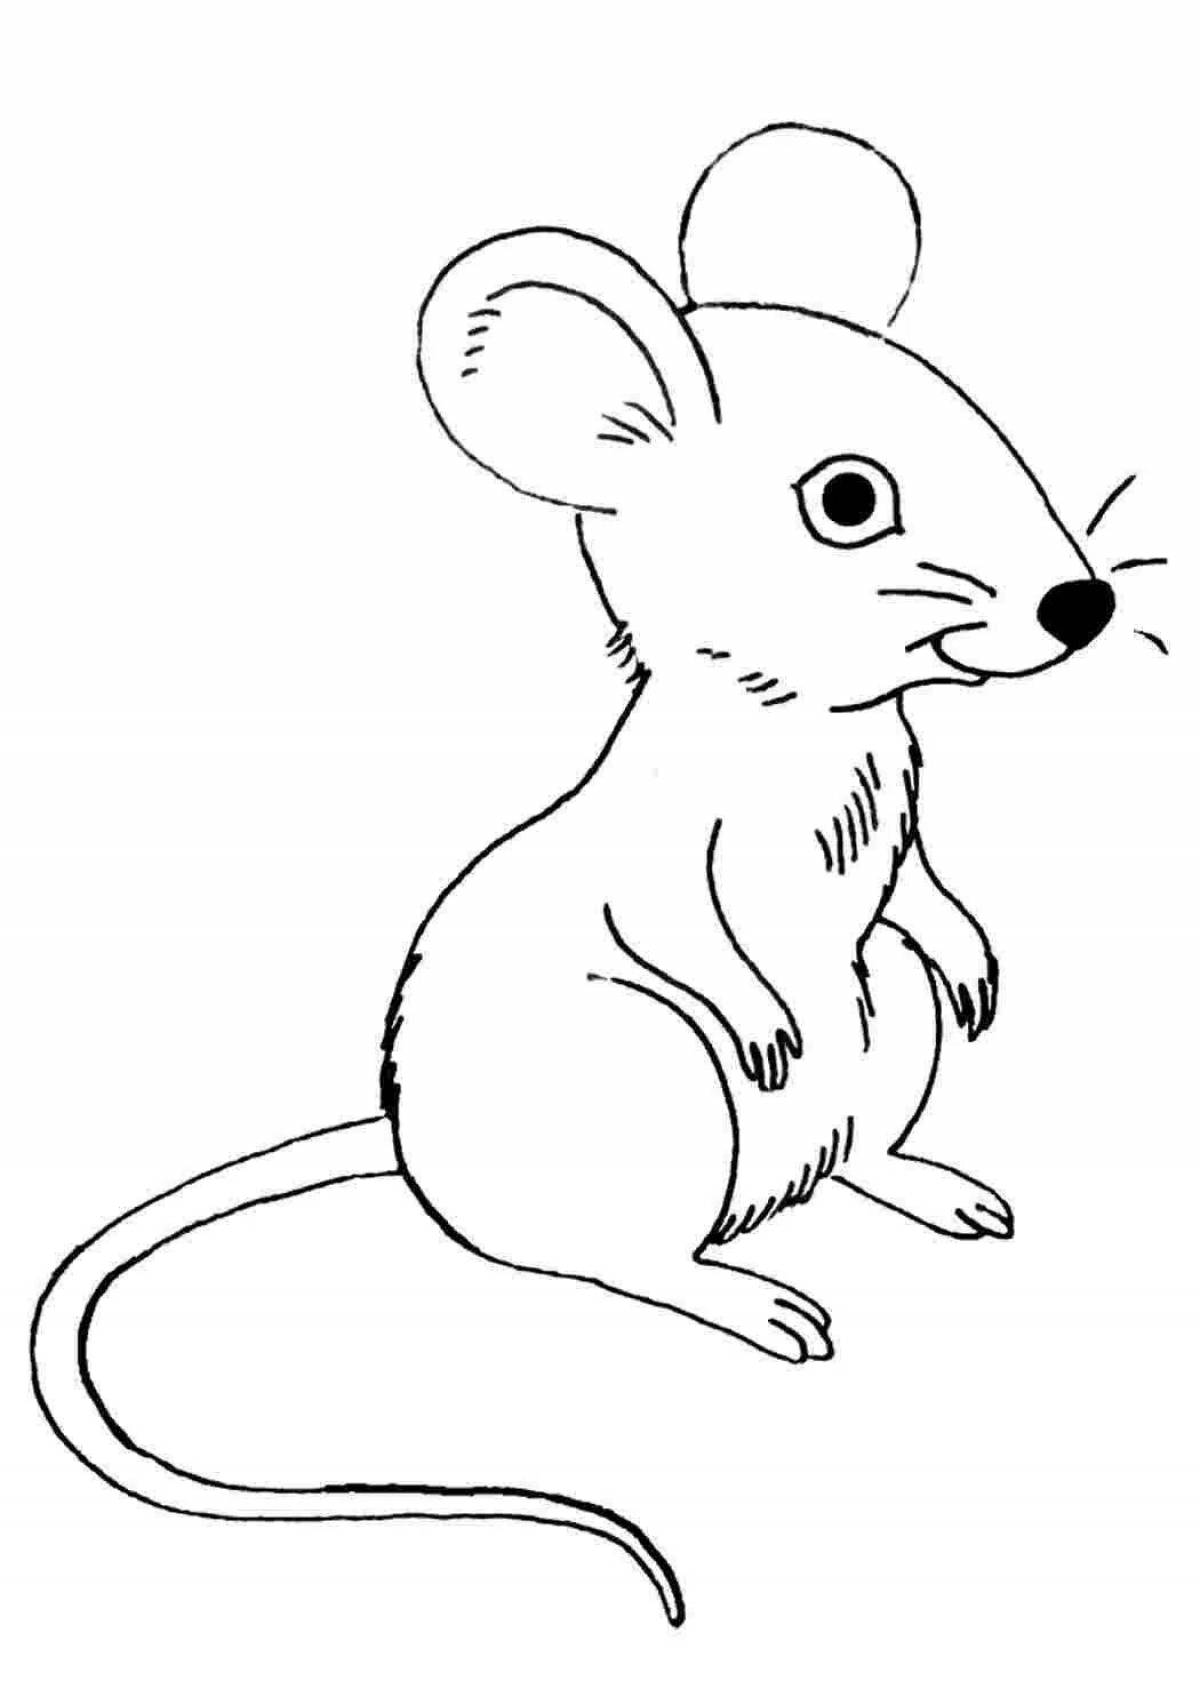 Playful coloring mouse for children 2-3 years old